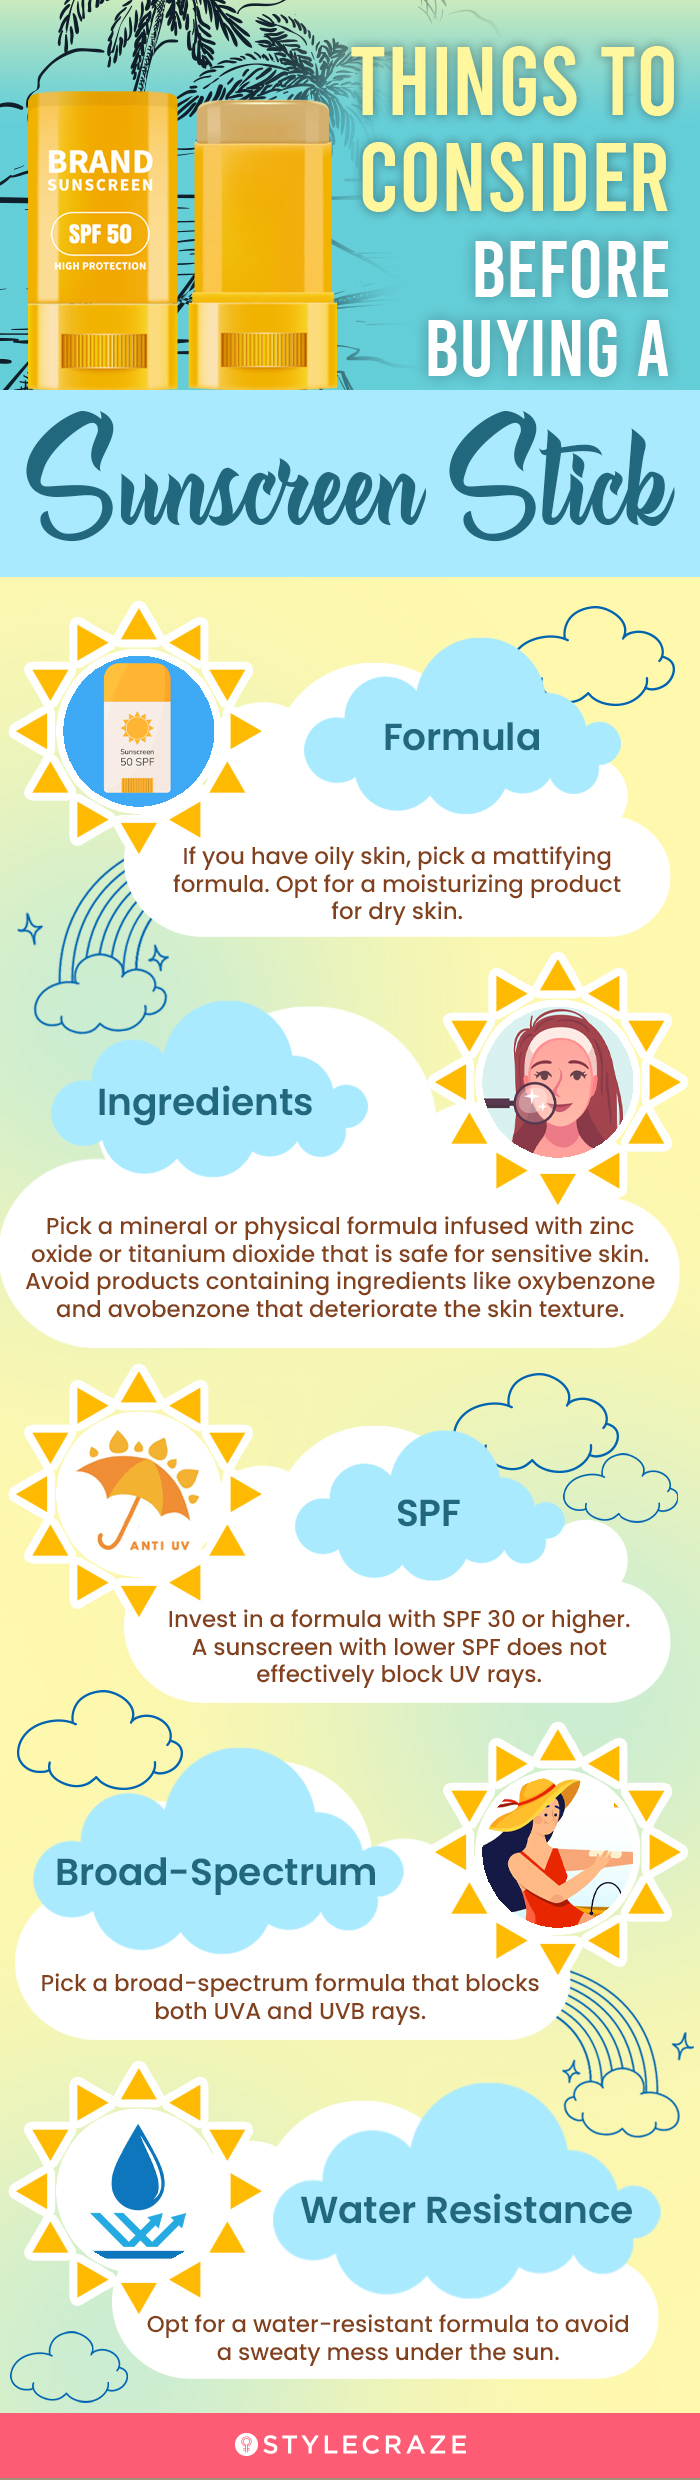 Things To Consider Before Buying A Sunscreen Stick [infographic]